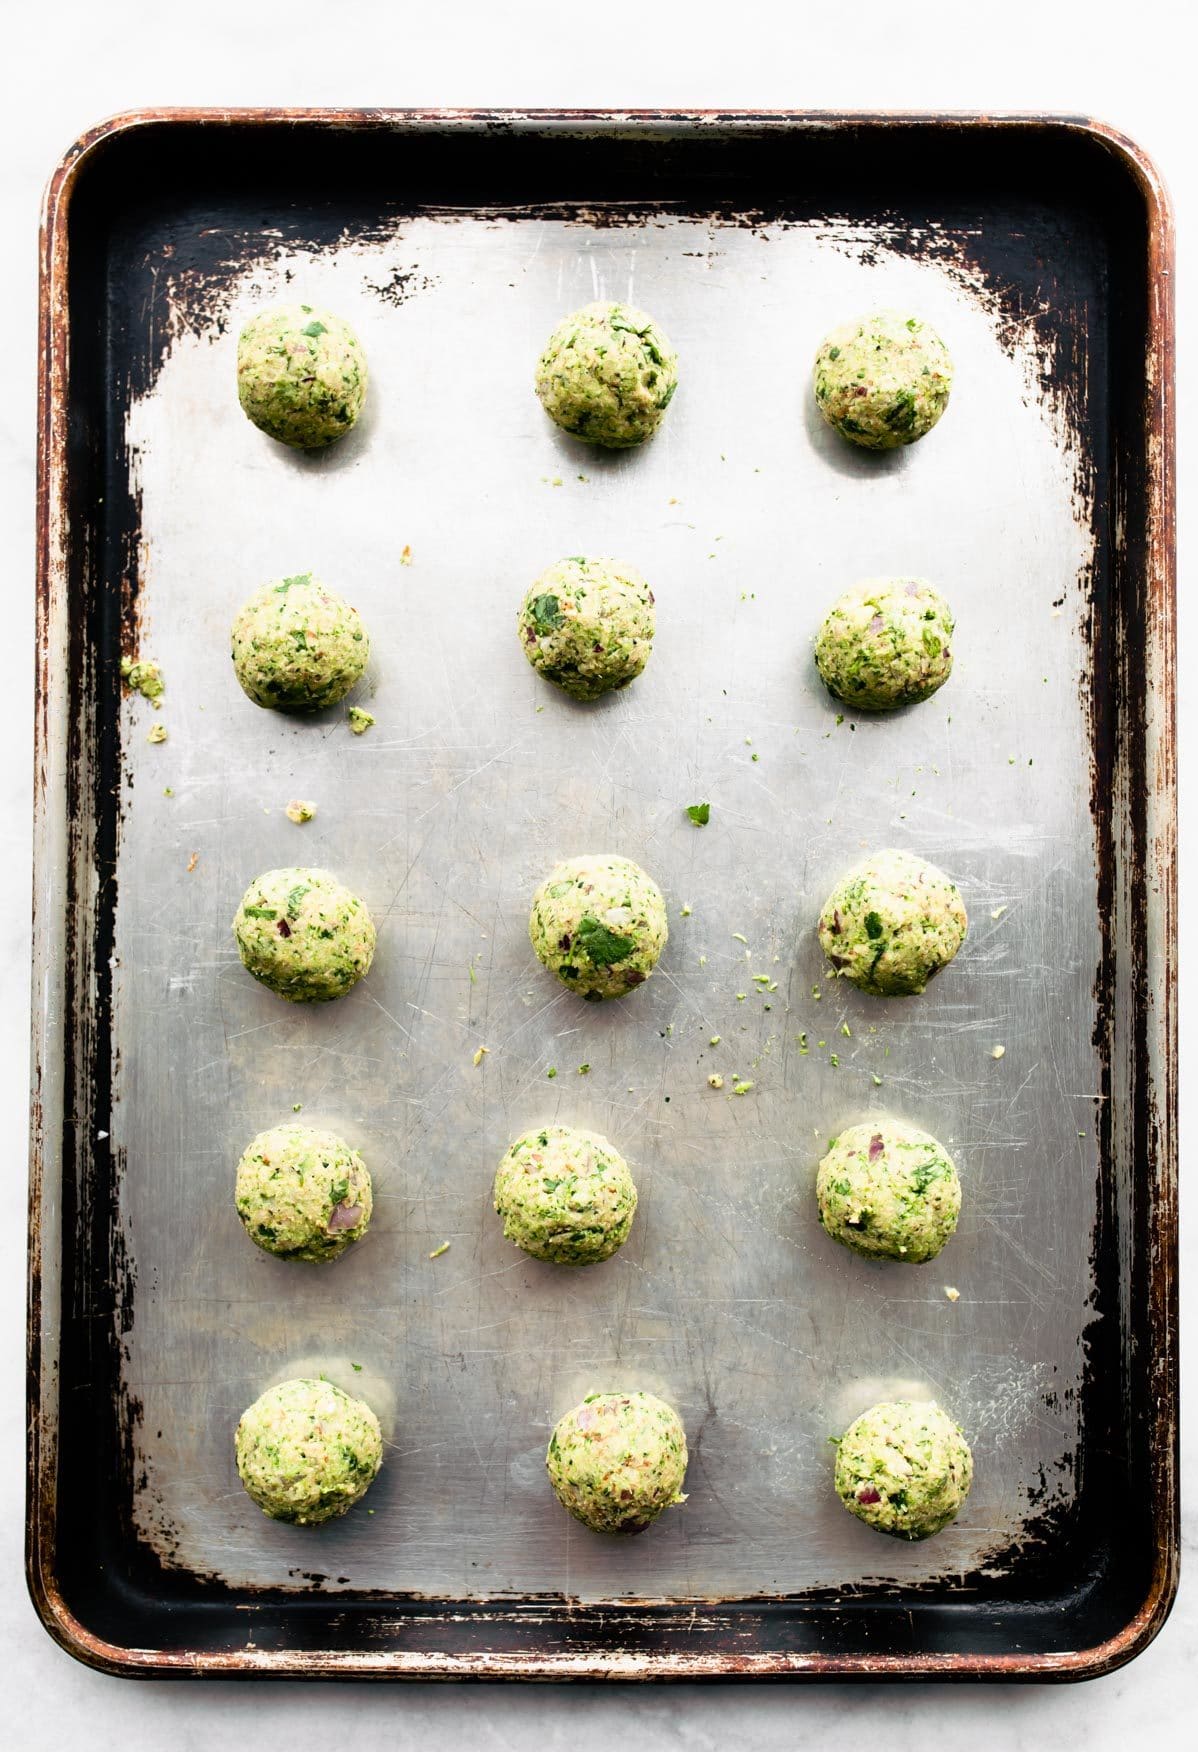 Entire silver baking sheet filled with lined up raw Mexican vegan falafel balls